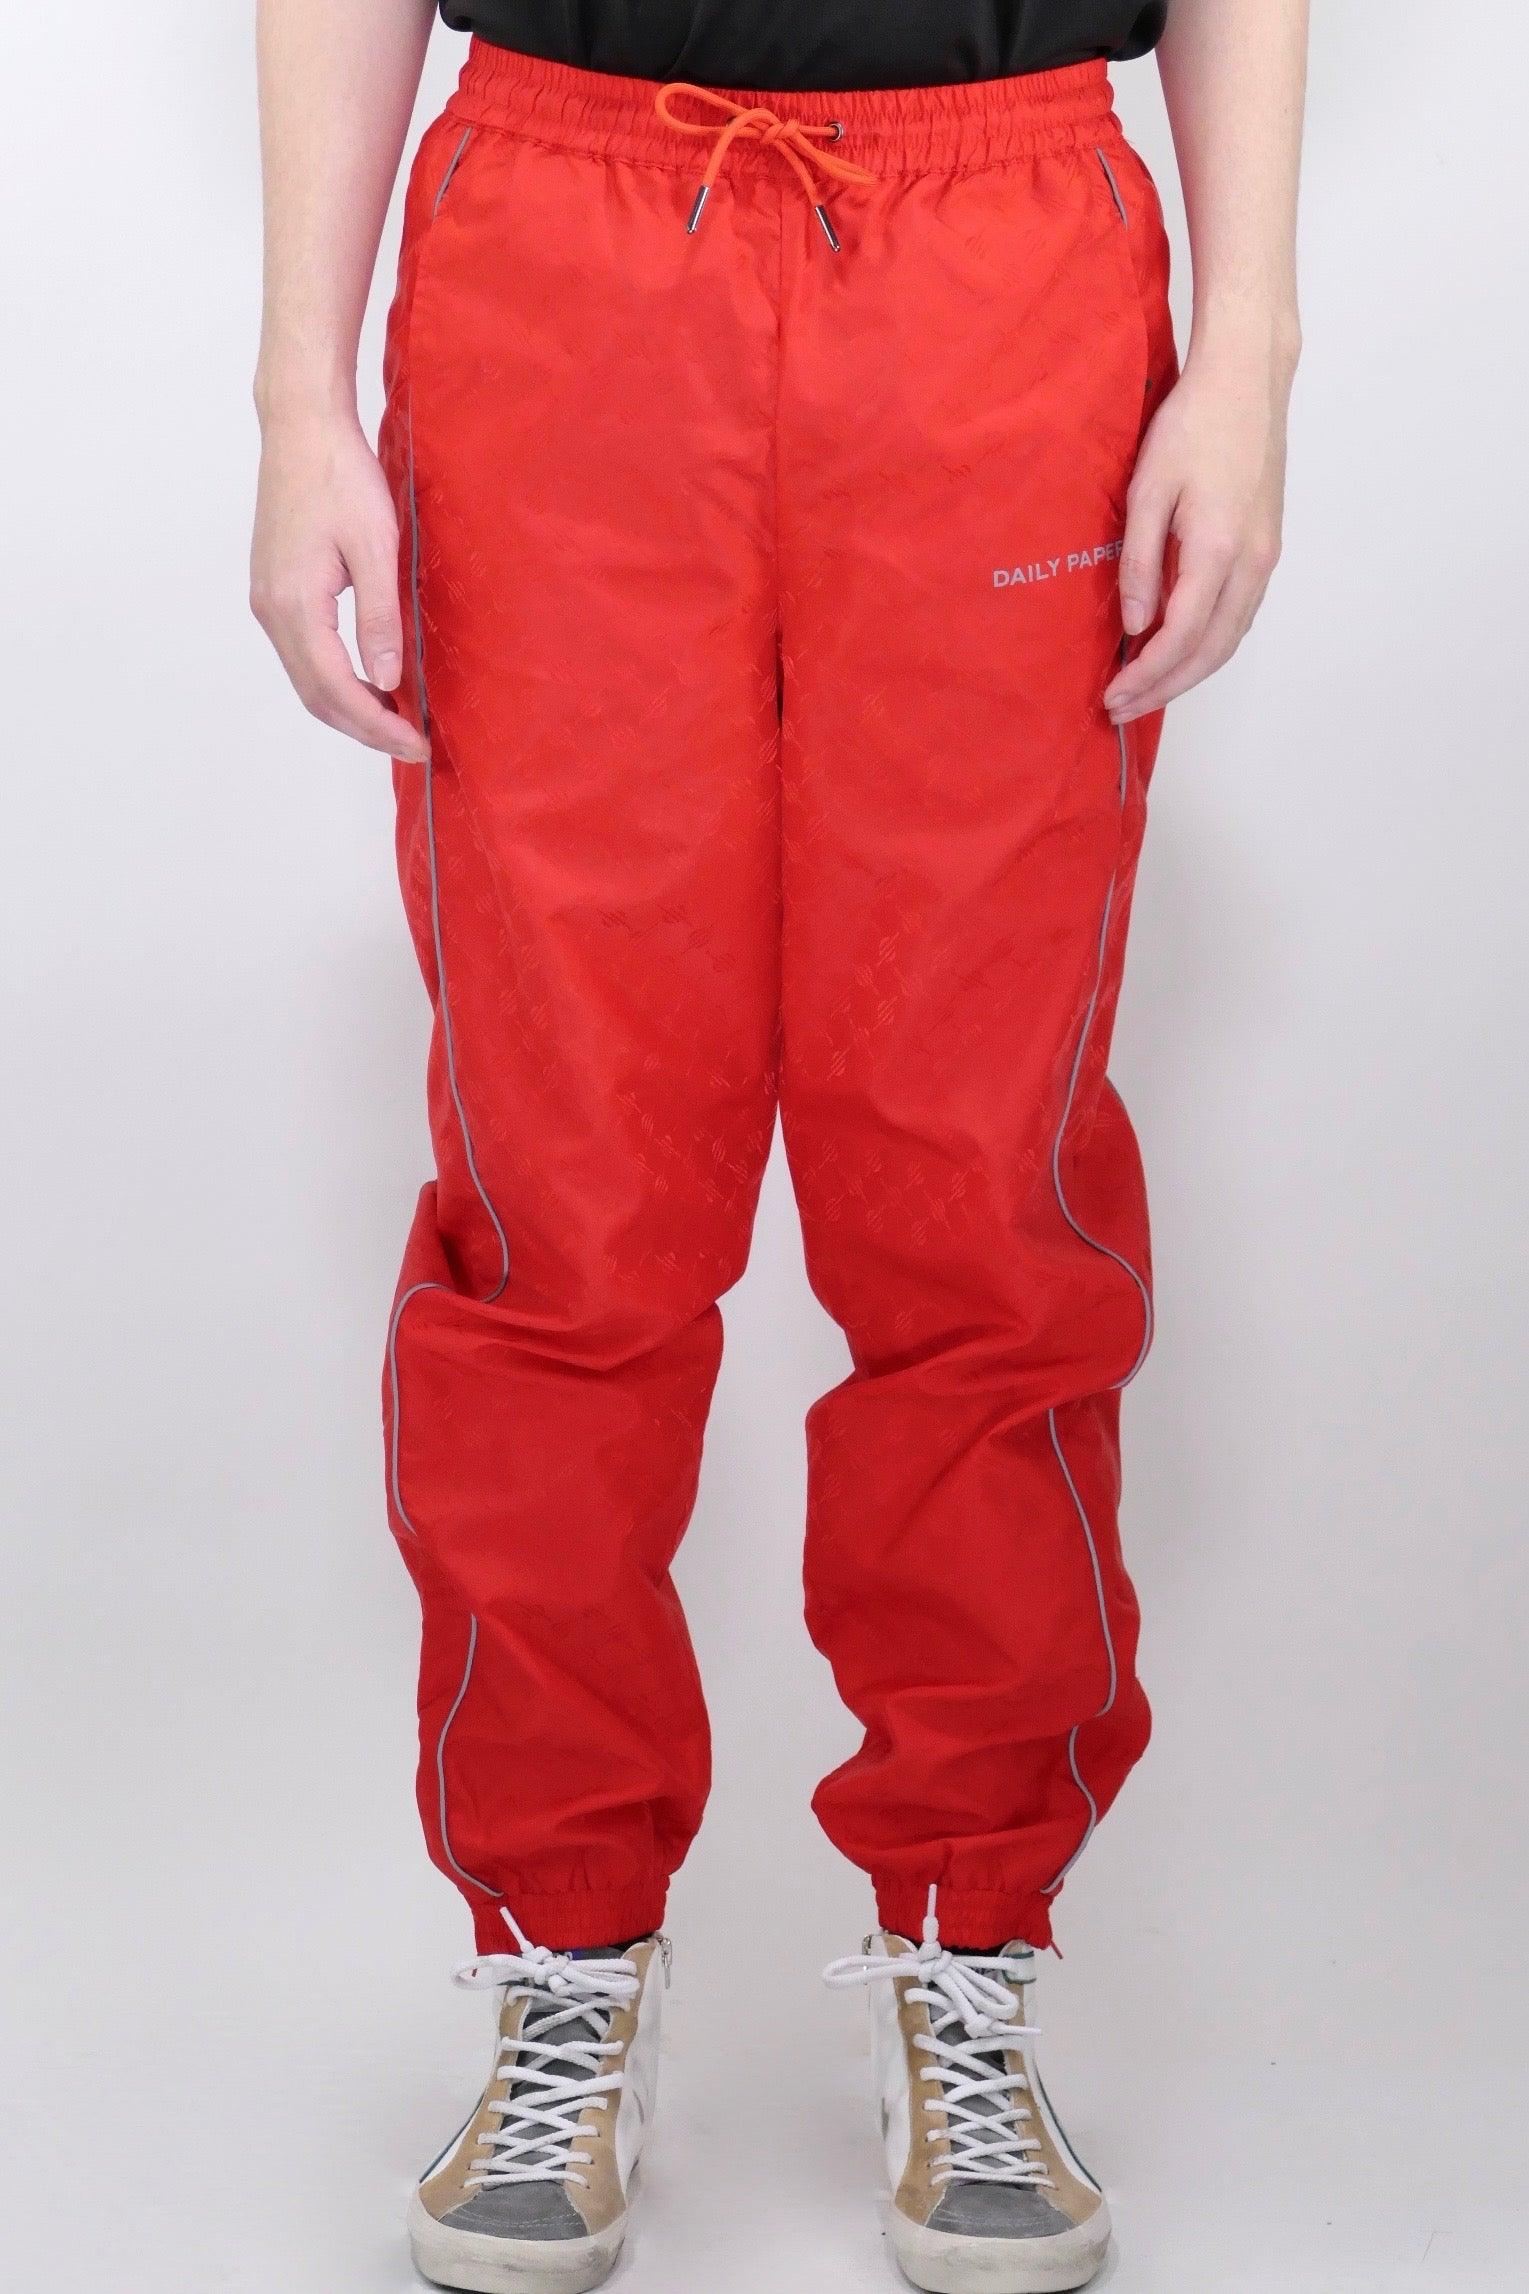 Daily Paper Mehdi Pants - Red - Due West